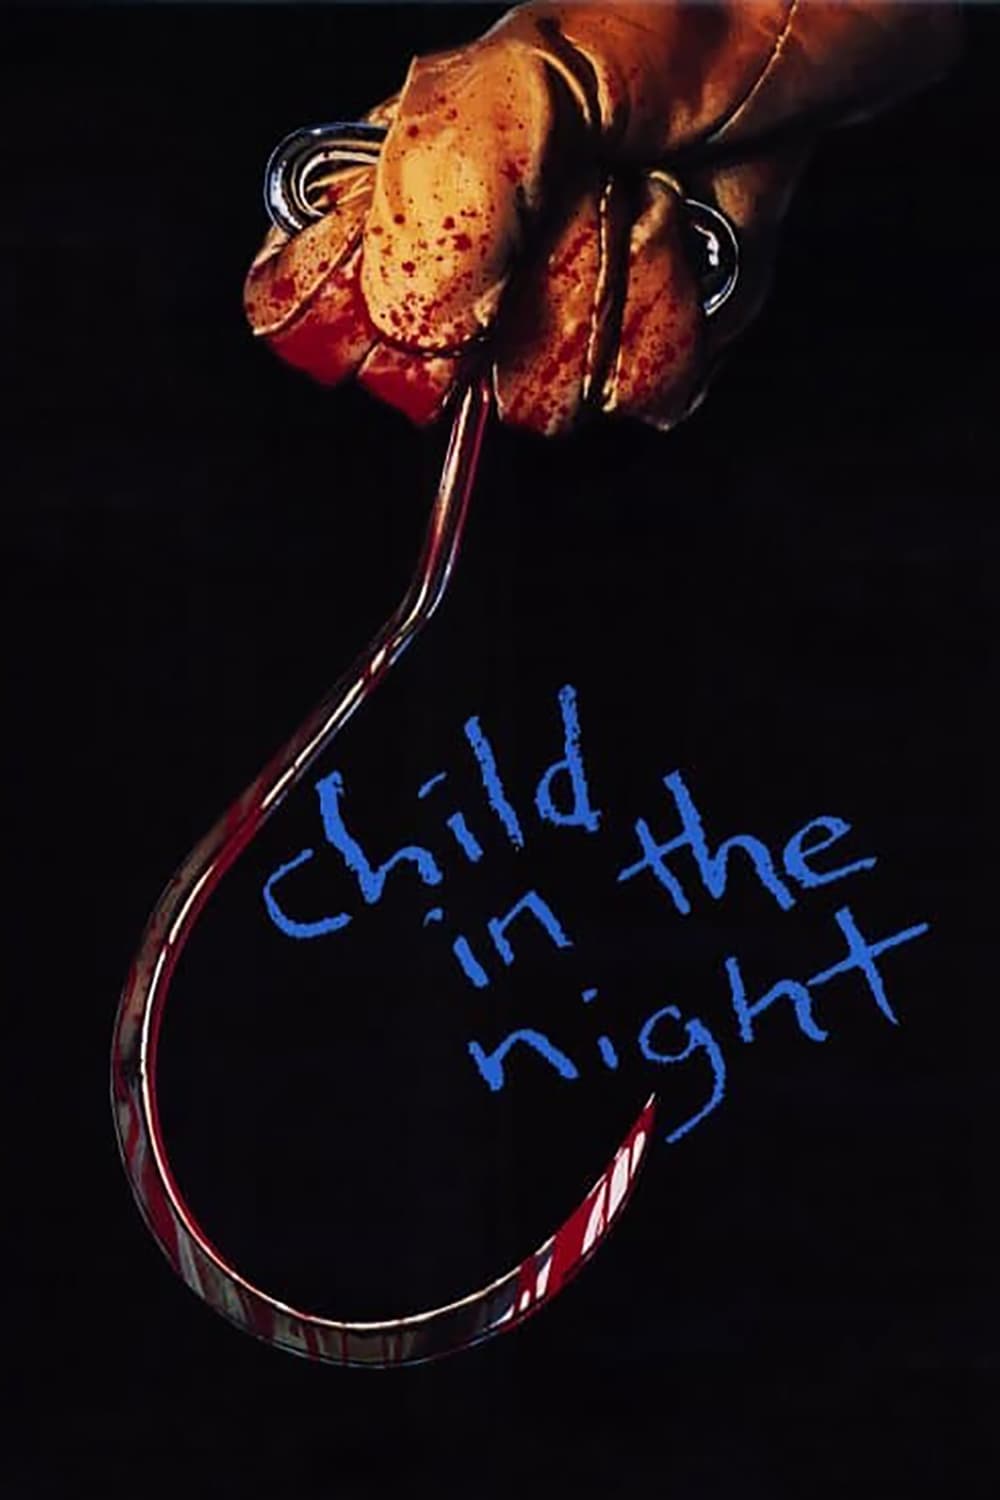 CHILD IN THE NIGHT